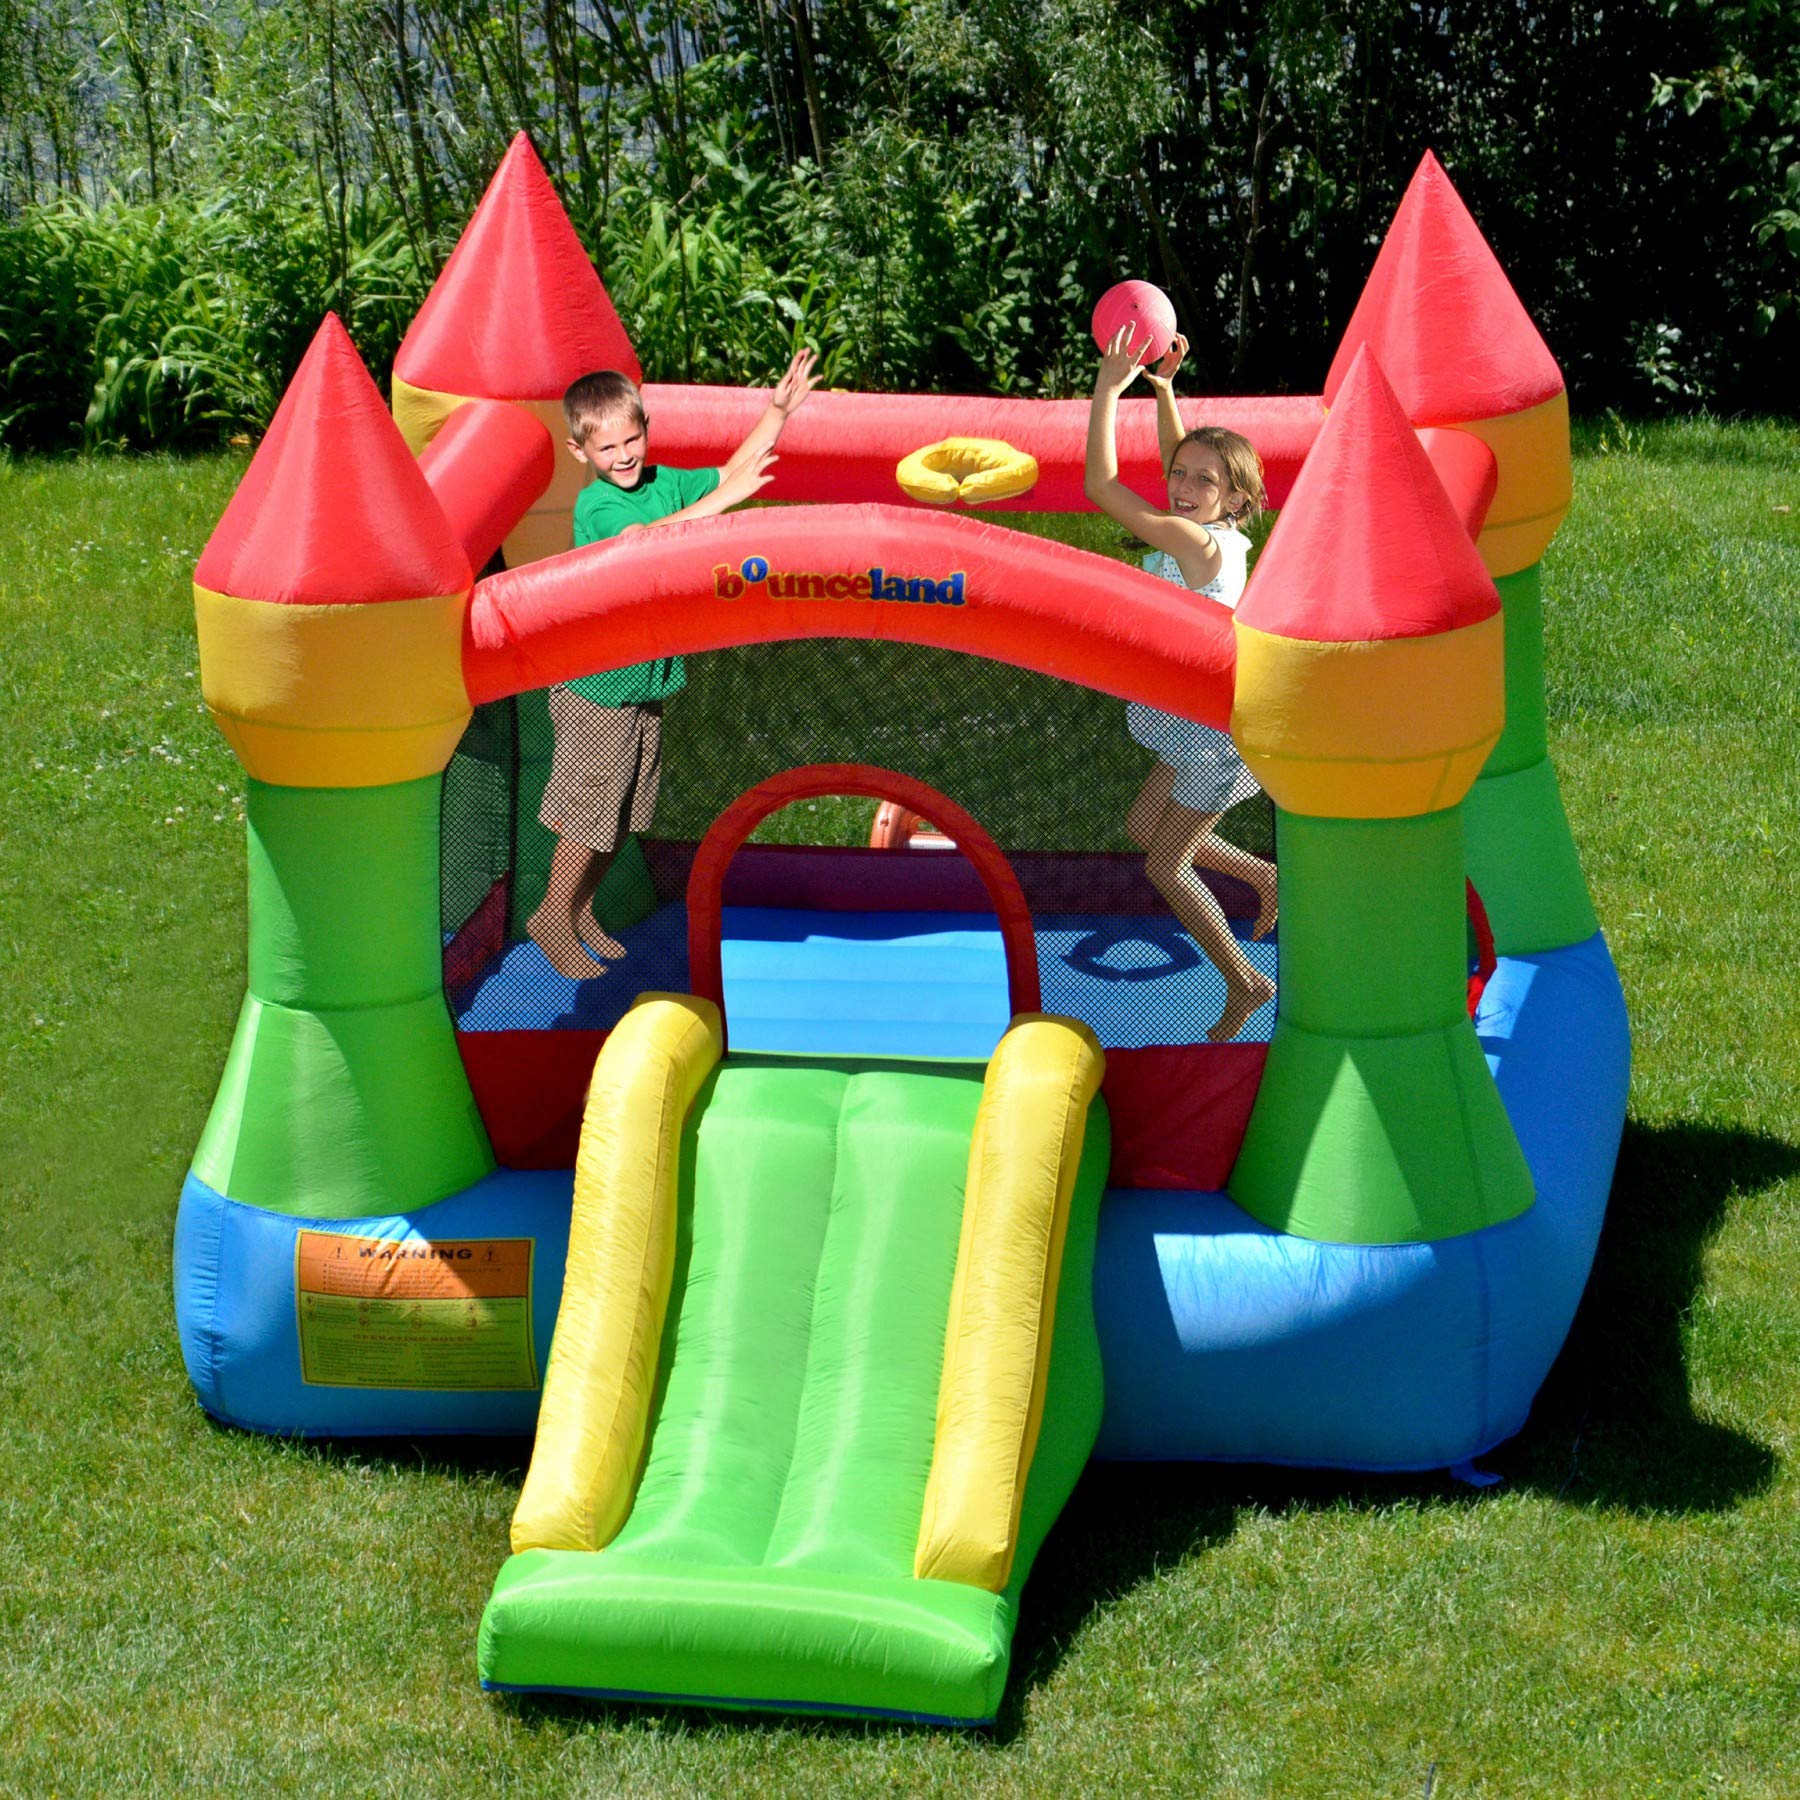 Bounceland Bounce House Castle with Basketball Hoop Inflatable Bouncer, Fun Slide, Safe Entrance Opening, UL Certified Strong Blower Included, 12 ft x 9 ft x 7 ft H